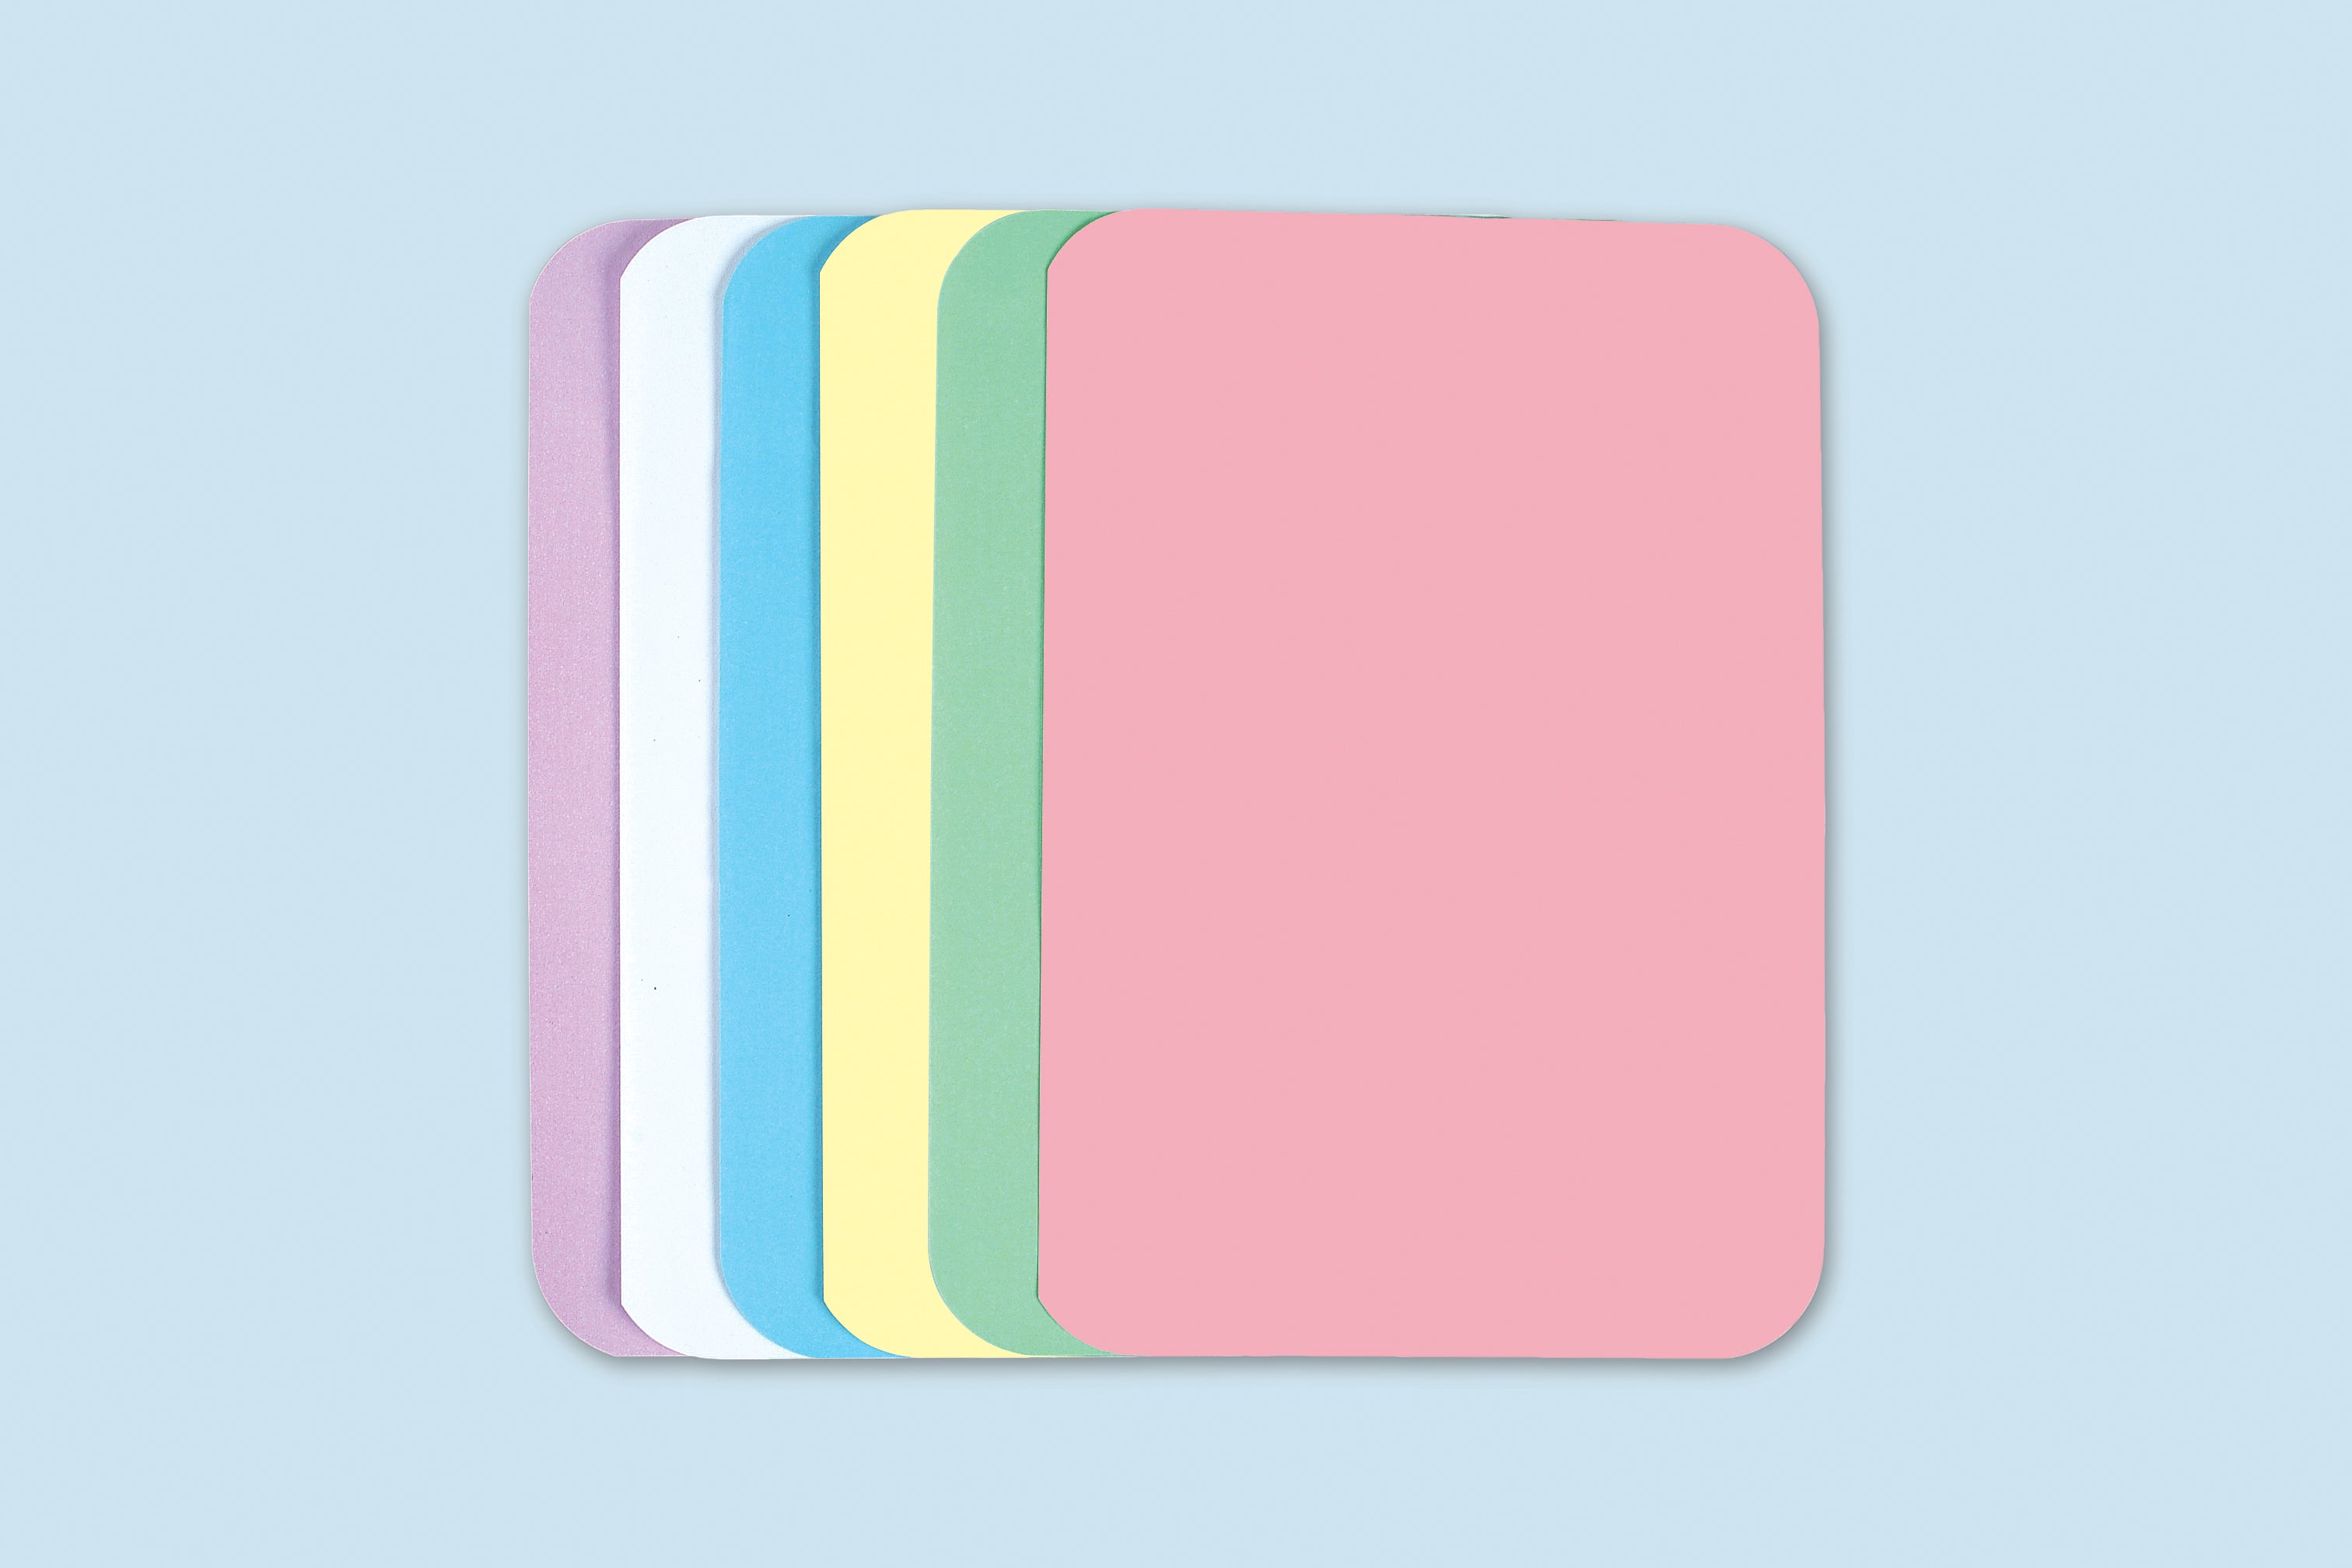 Plasdent Paper Tray Covers